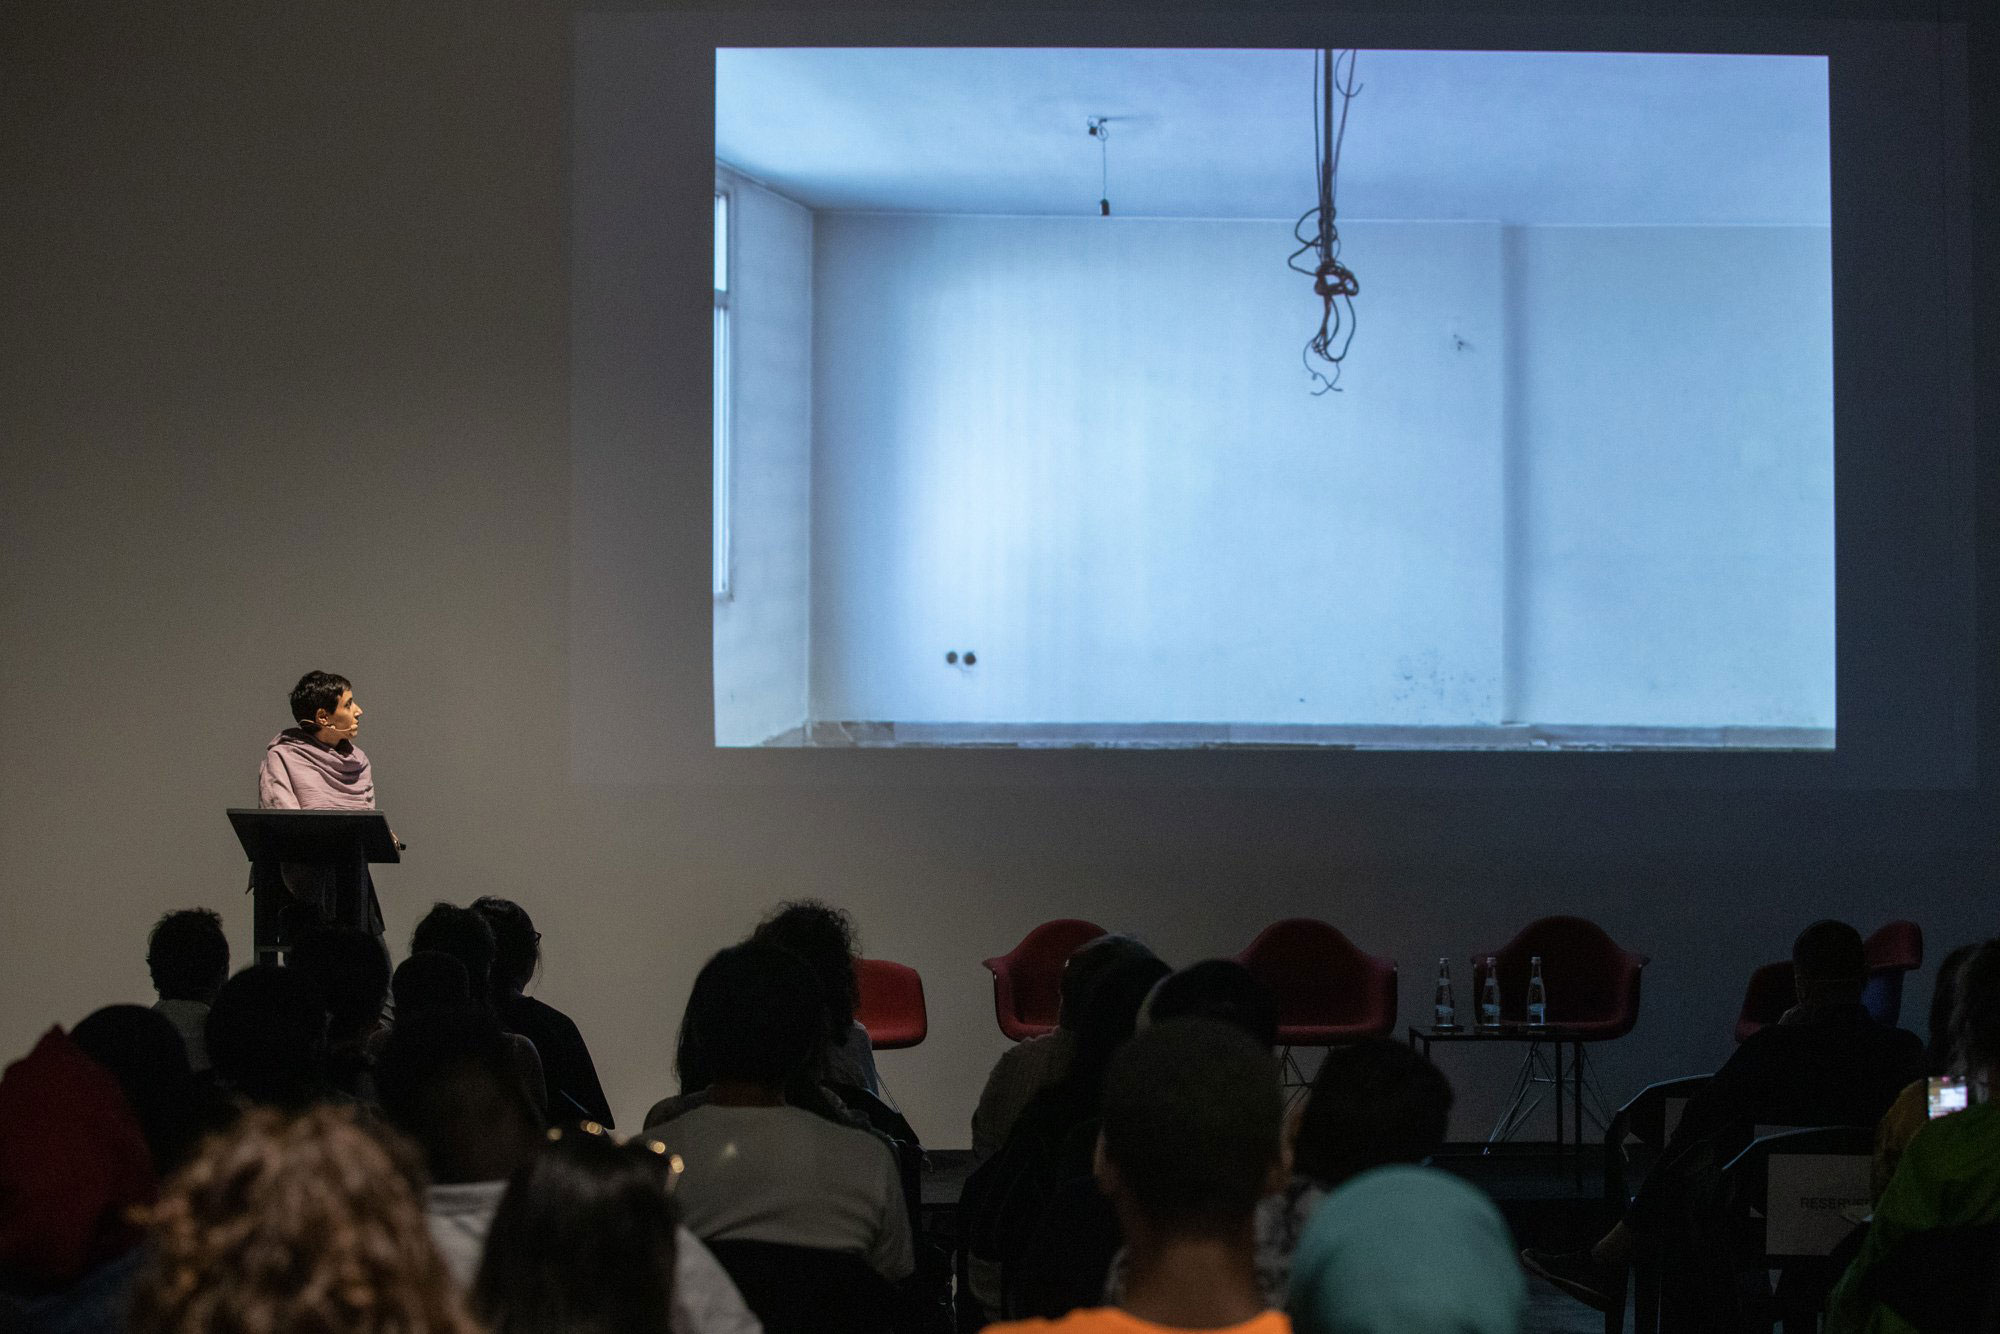 Nazgol Ansarinia presenting Tehran: the view at an altitude of 1,743 m, at Temporary Spaces, Alserkal Arts Foundation Project Space, Dubai.